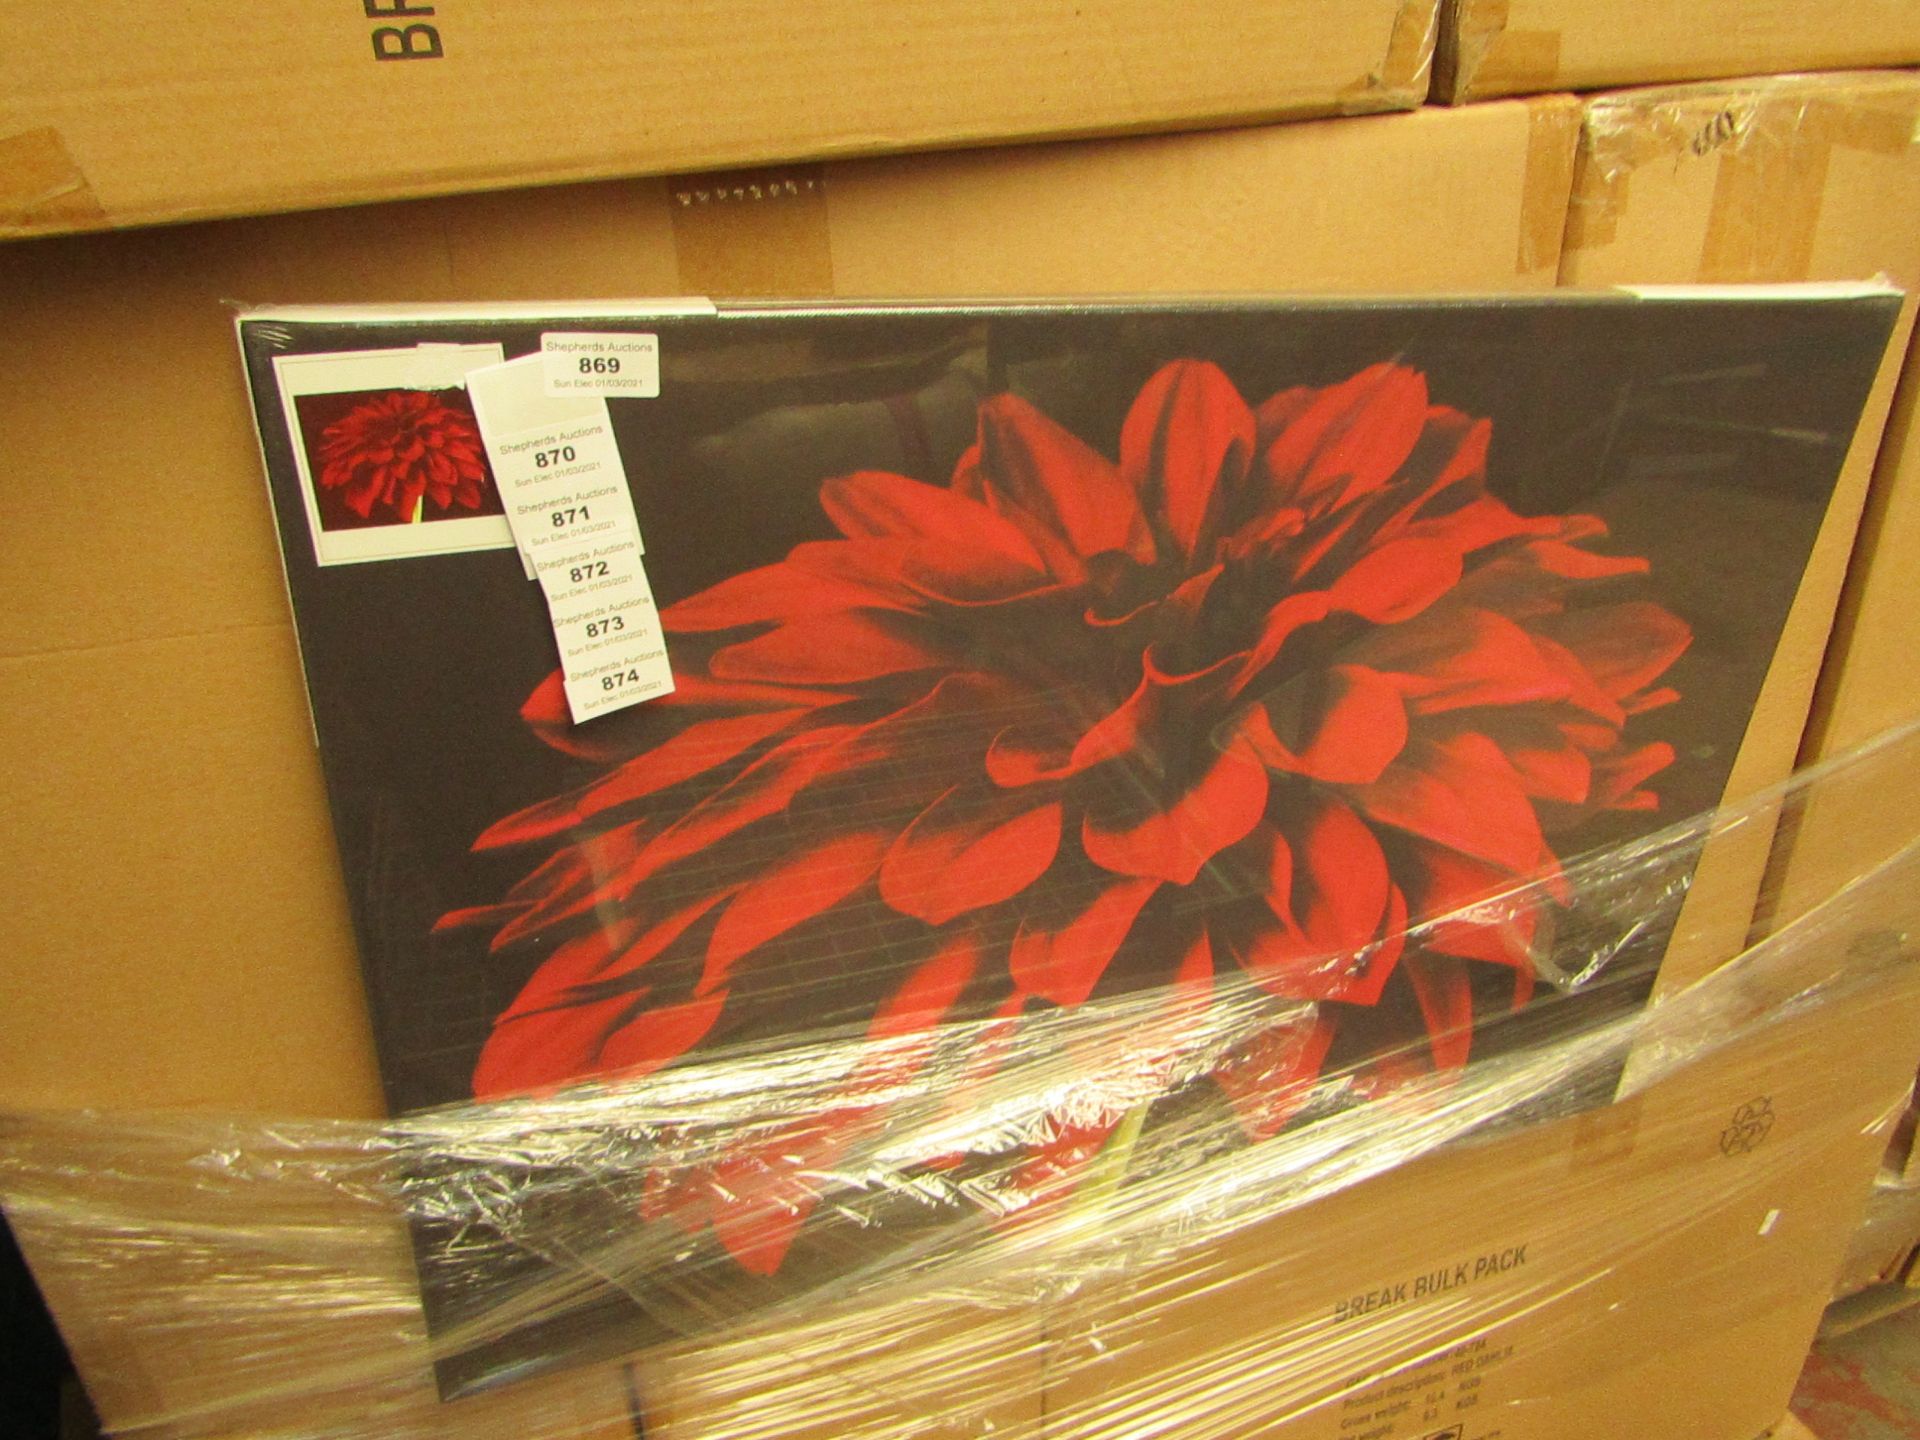 2x Red Dahlia Plant - Landscape Canvas (Length 70cmx Height 50cm) - New & Packaged.